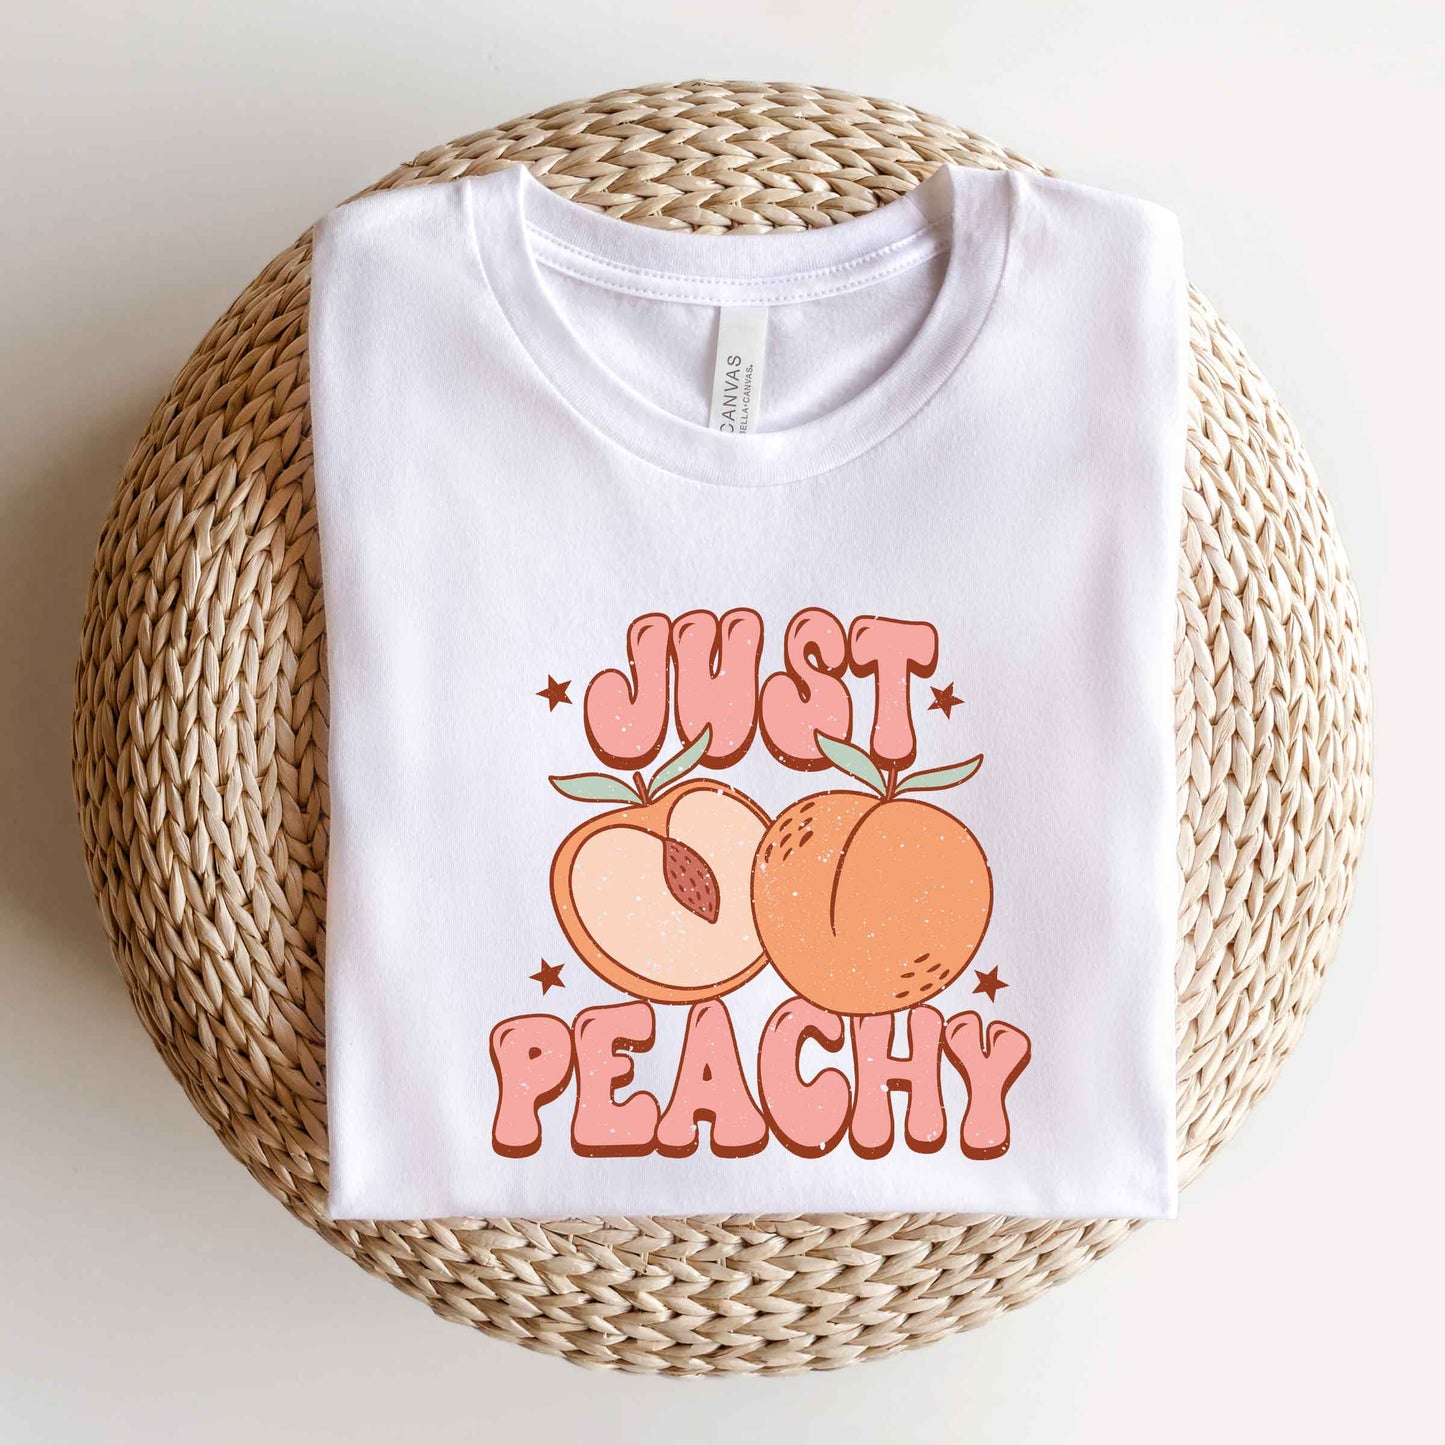 Just Peachy Colorful Peach | Short Sleeve Graphic Tee